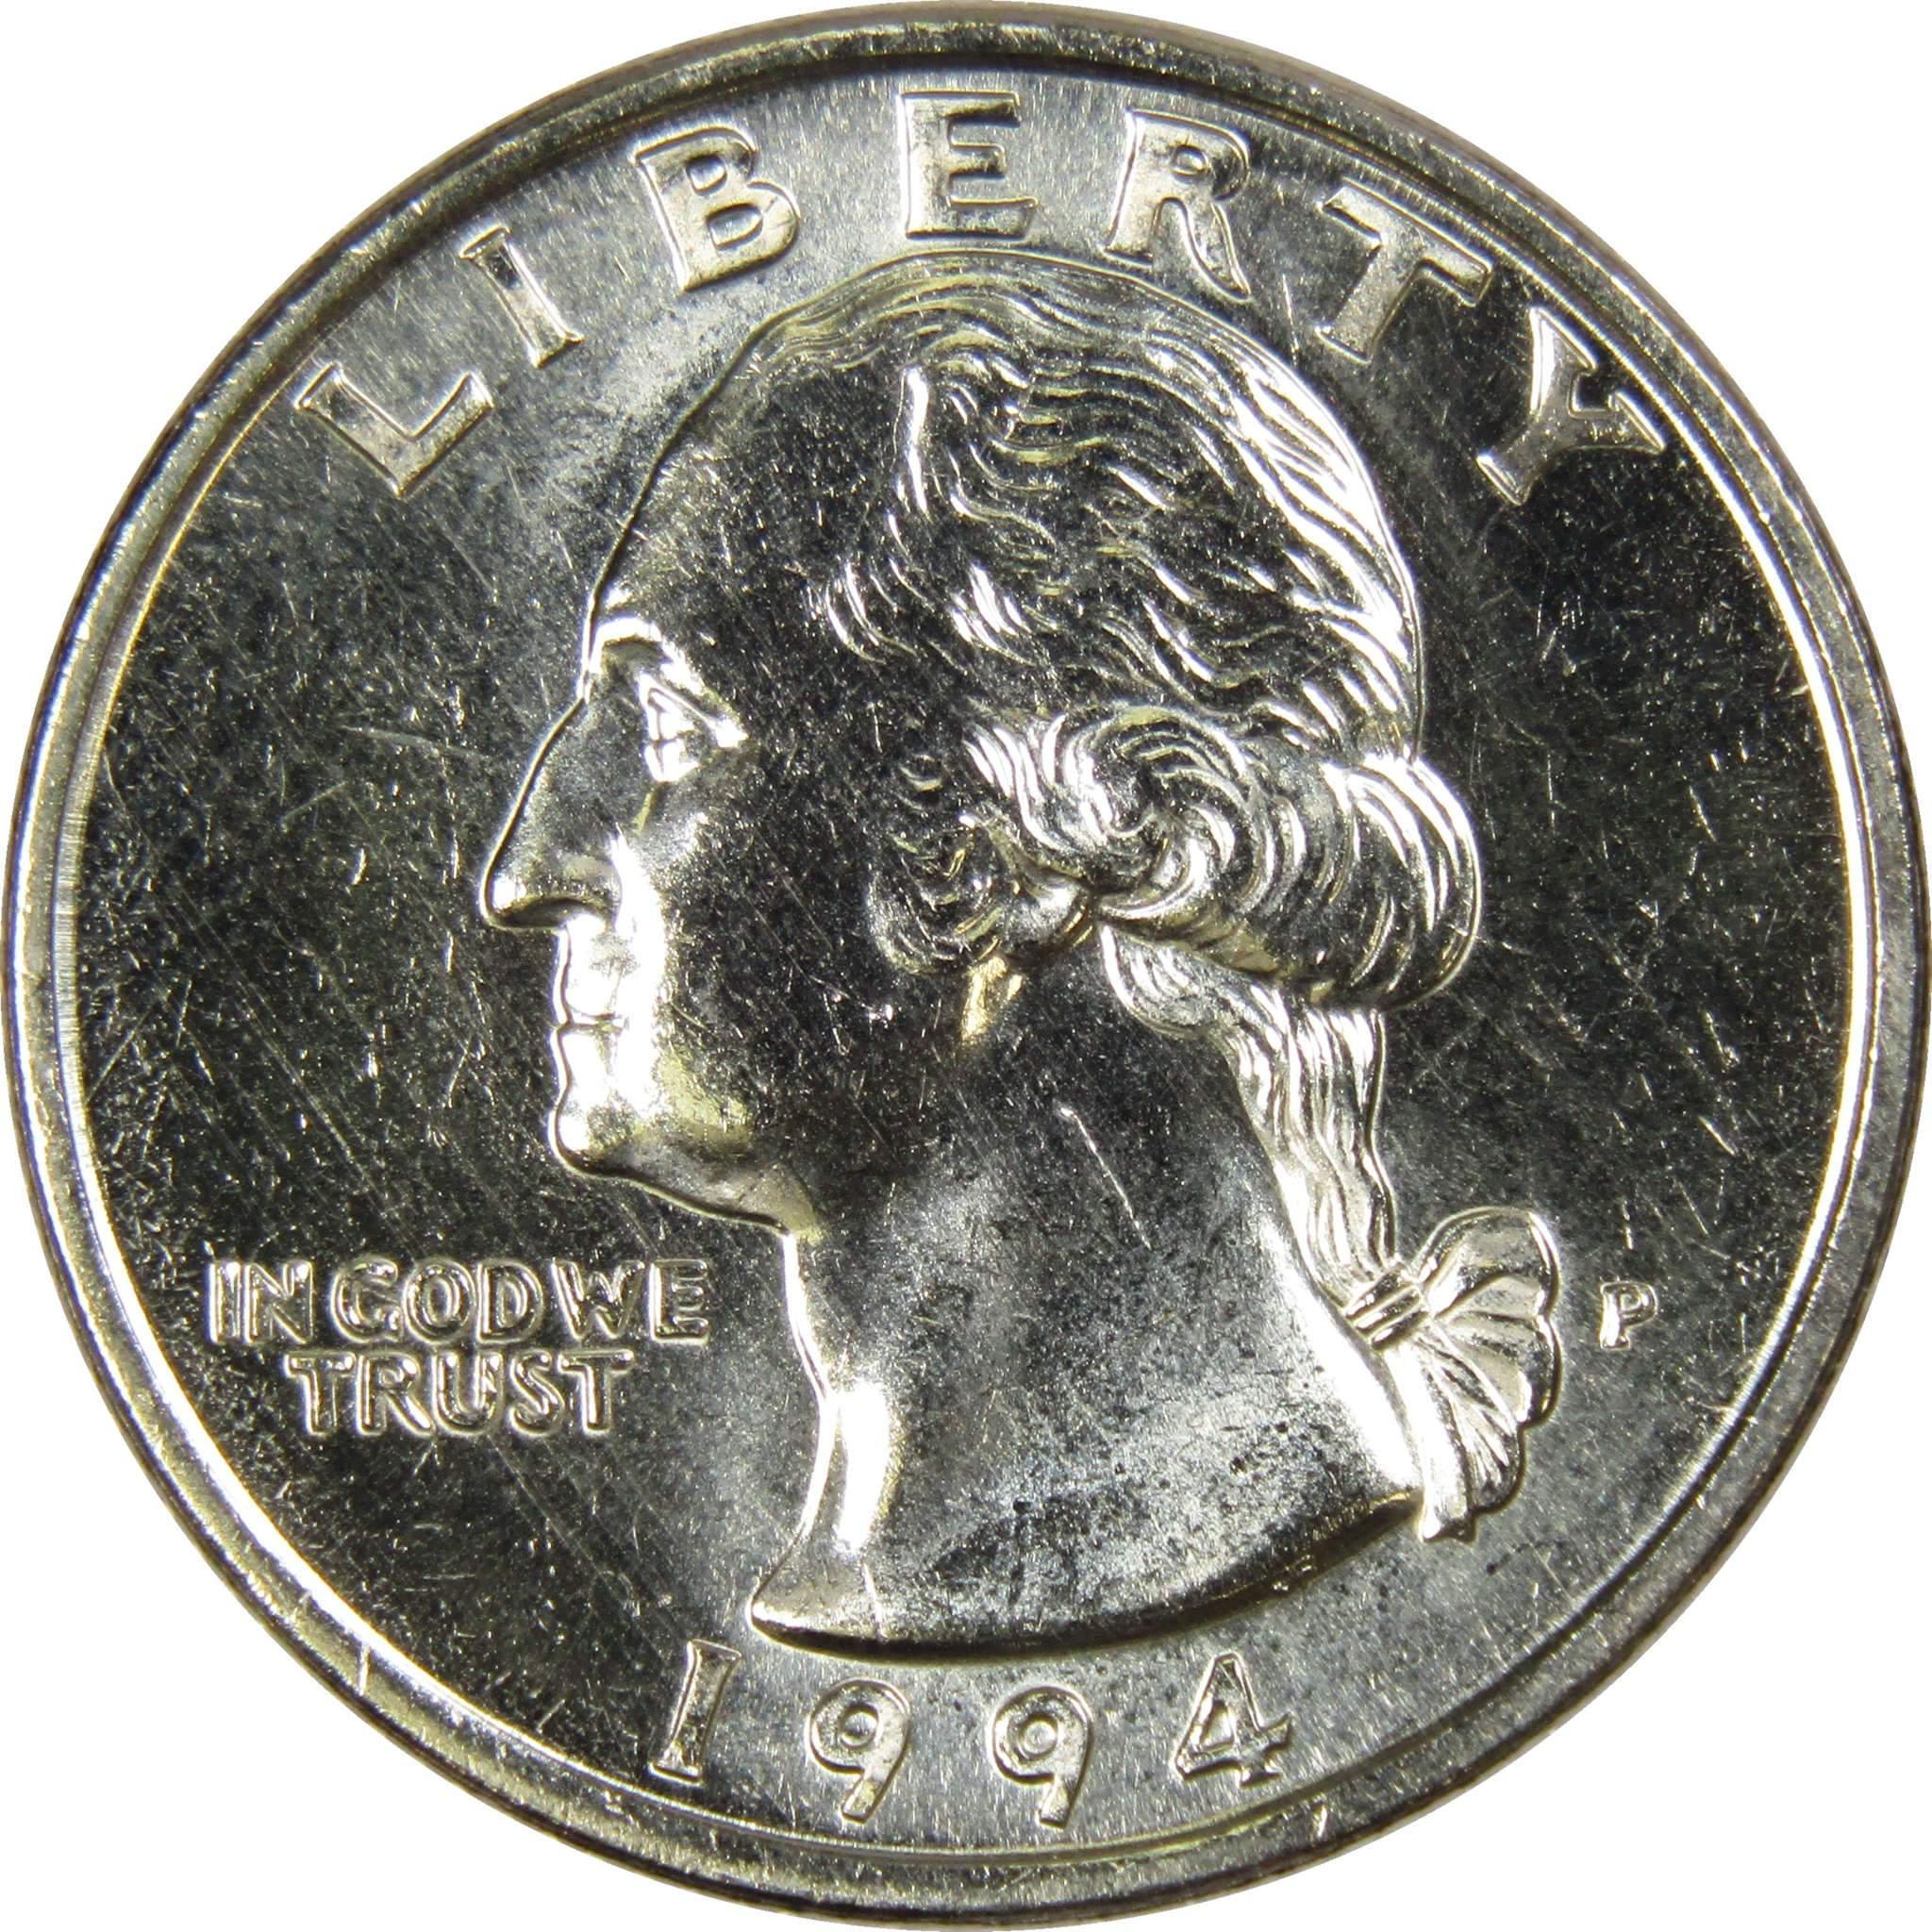 1994 P Washington Quarter BU Uncirculated Mint State 25c US Coin Collectible